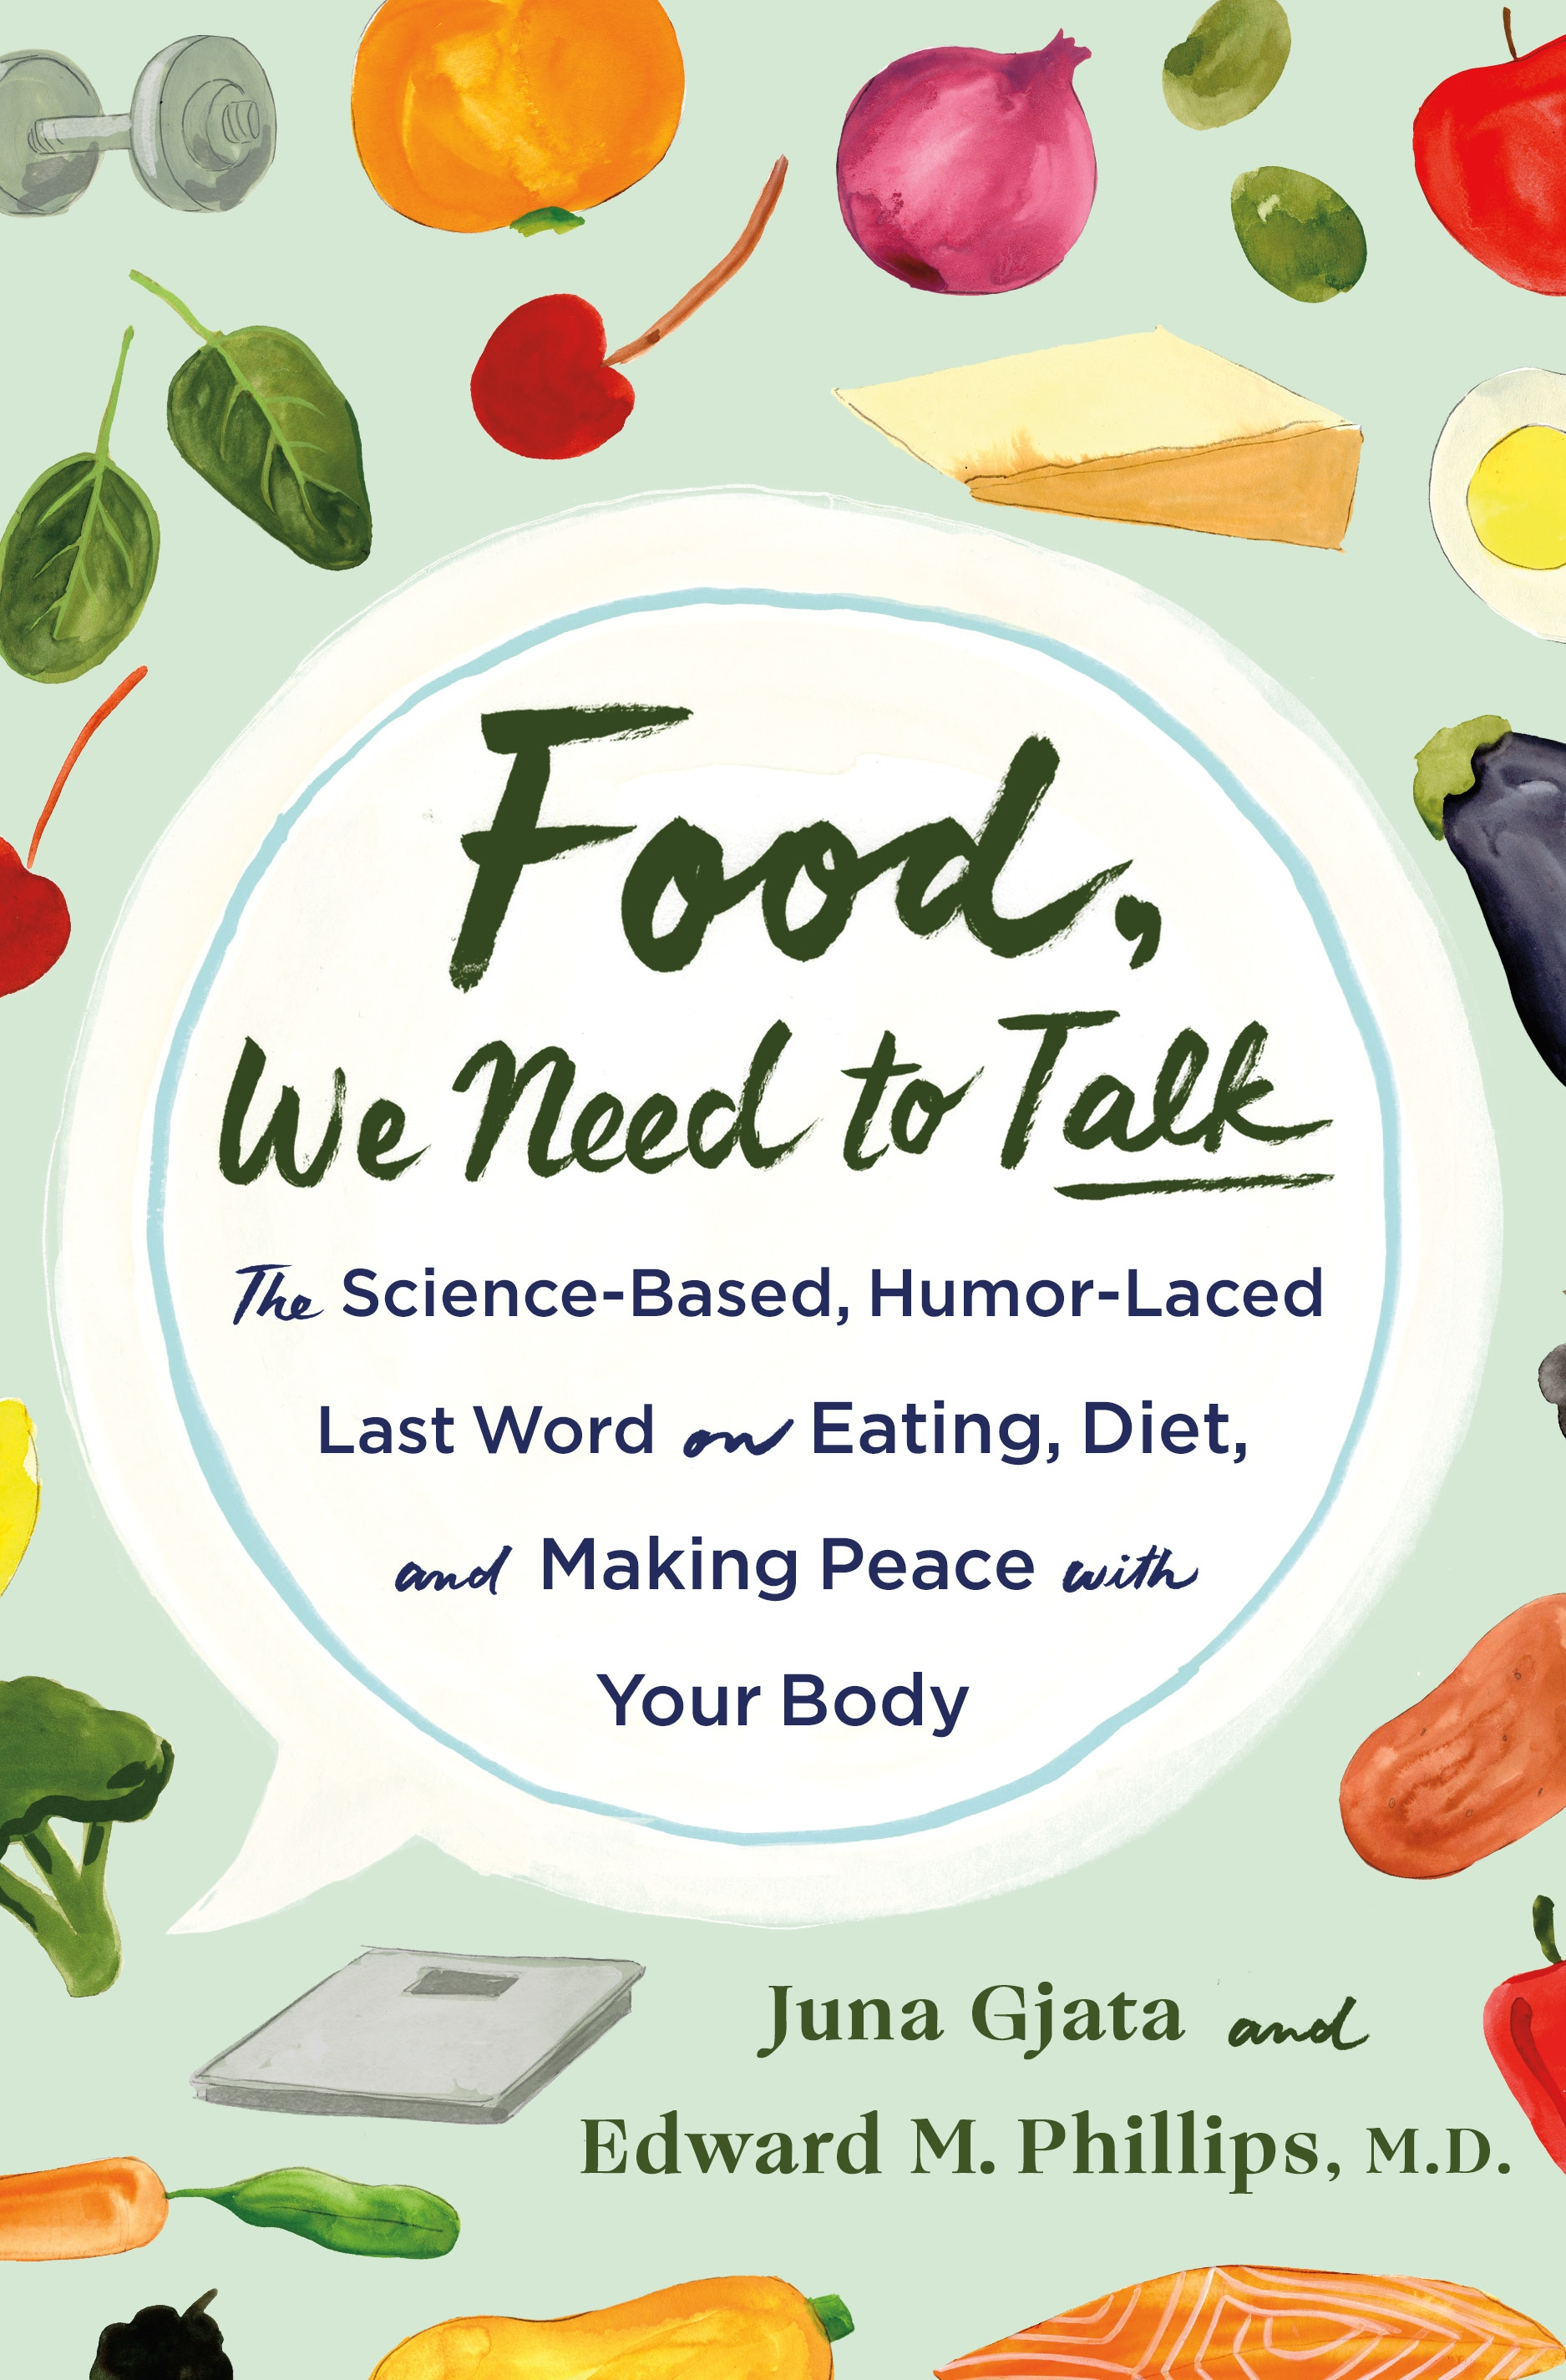 Real talk about diet culture from the ‘Food, We Need to Talk’ authors